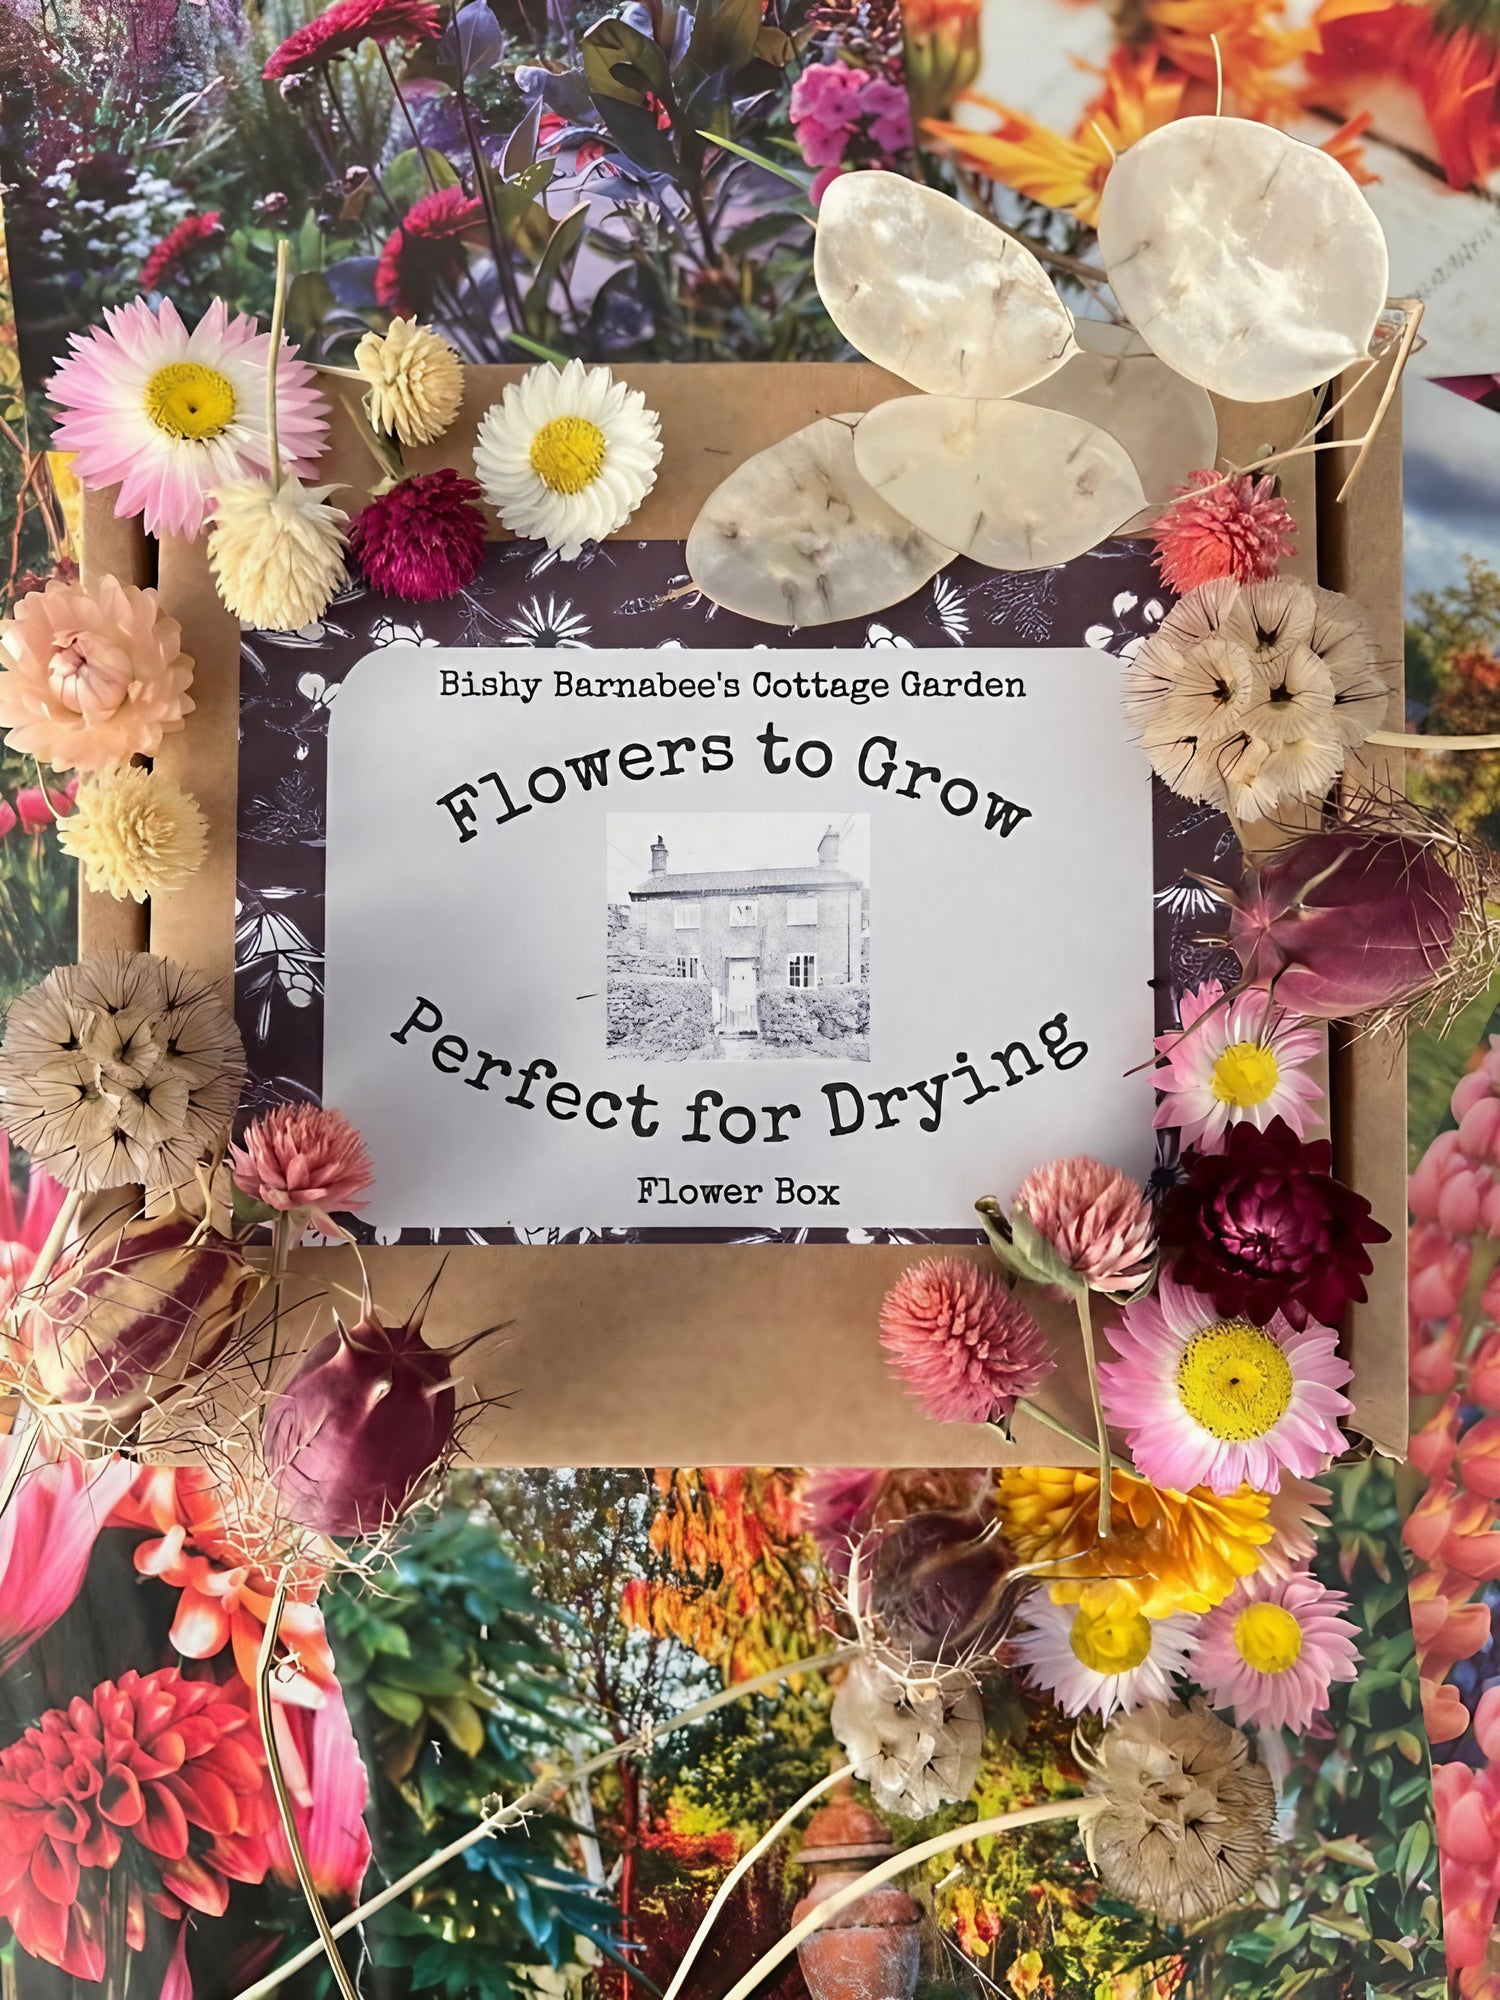 Flowers to grow kit designed specifically for drying purposes